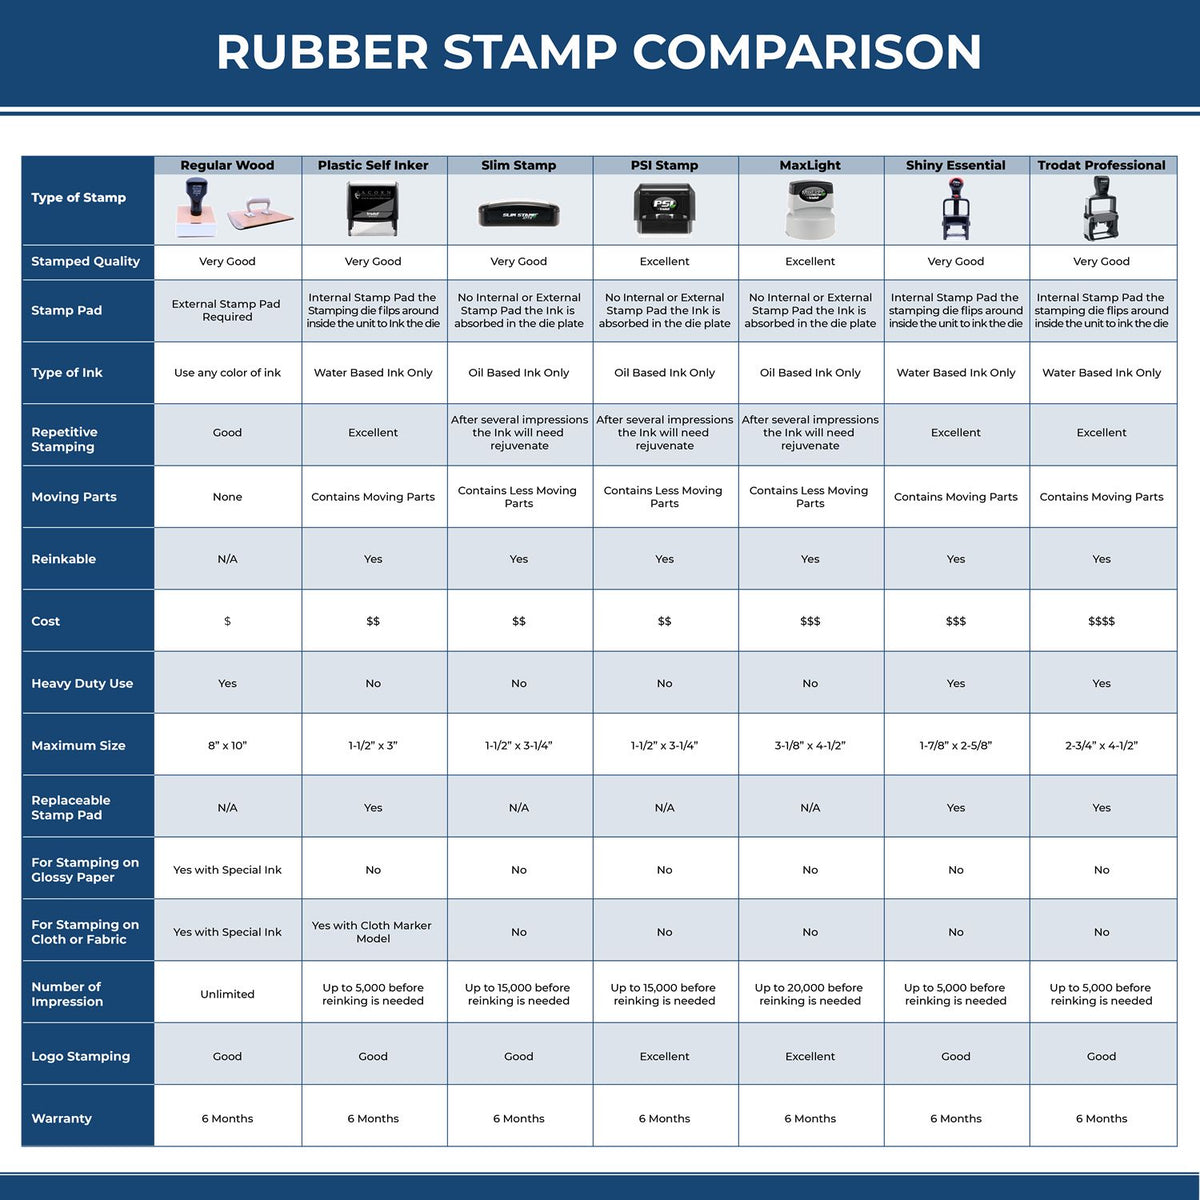 Large Self Inking Rough Draft Stamp 4153S Rubber Stamp Comparison